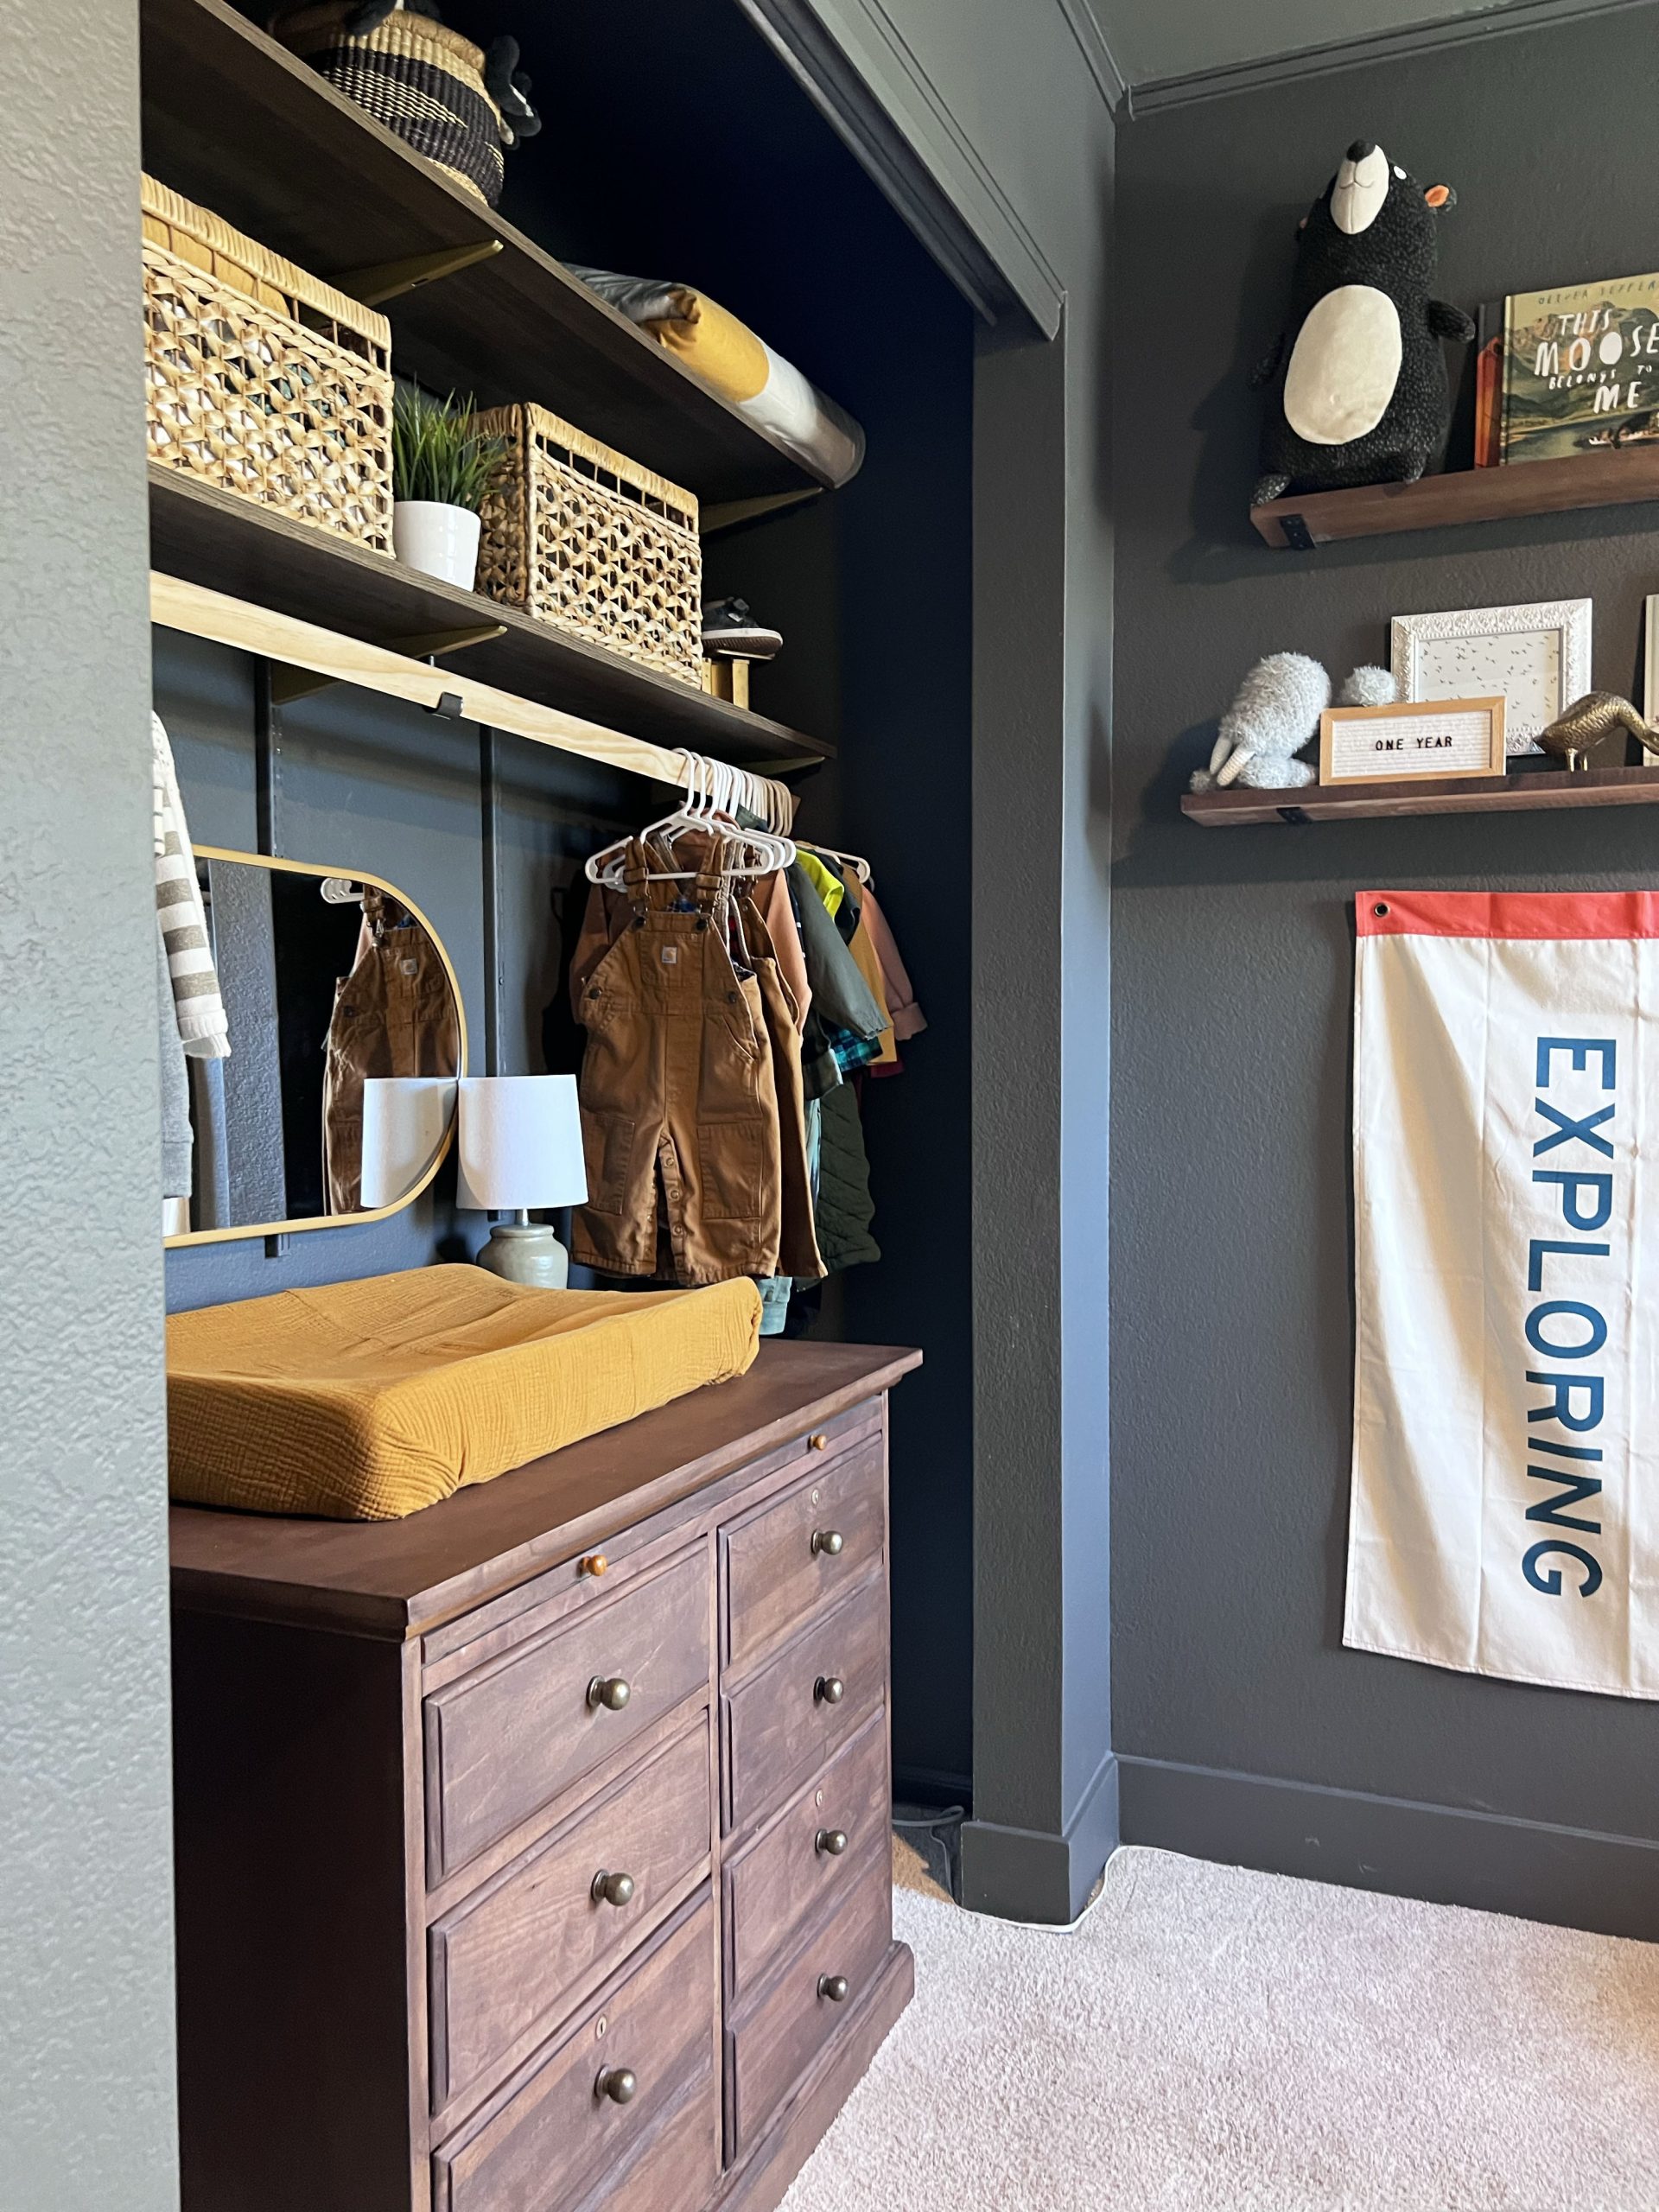 A closet without doors- making use of your hidden 35 square feet